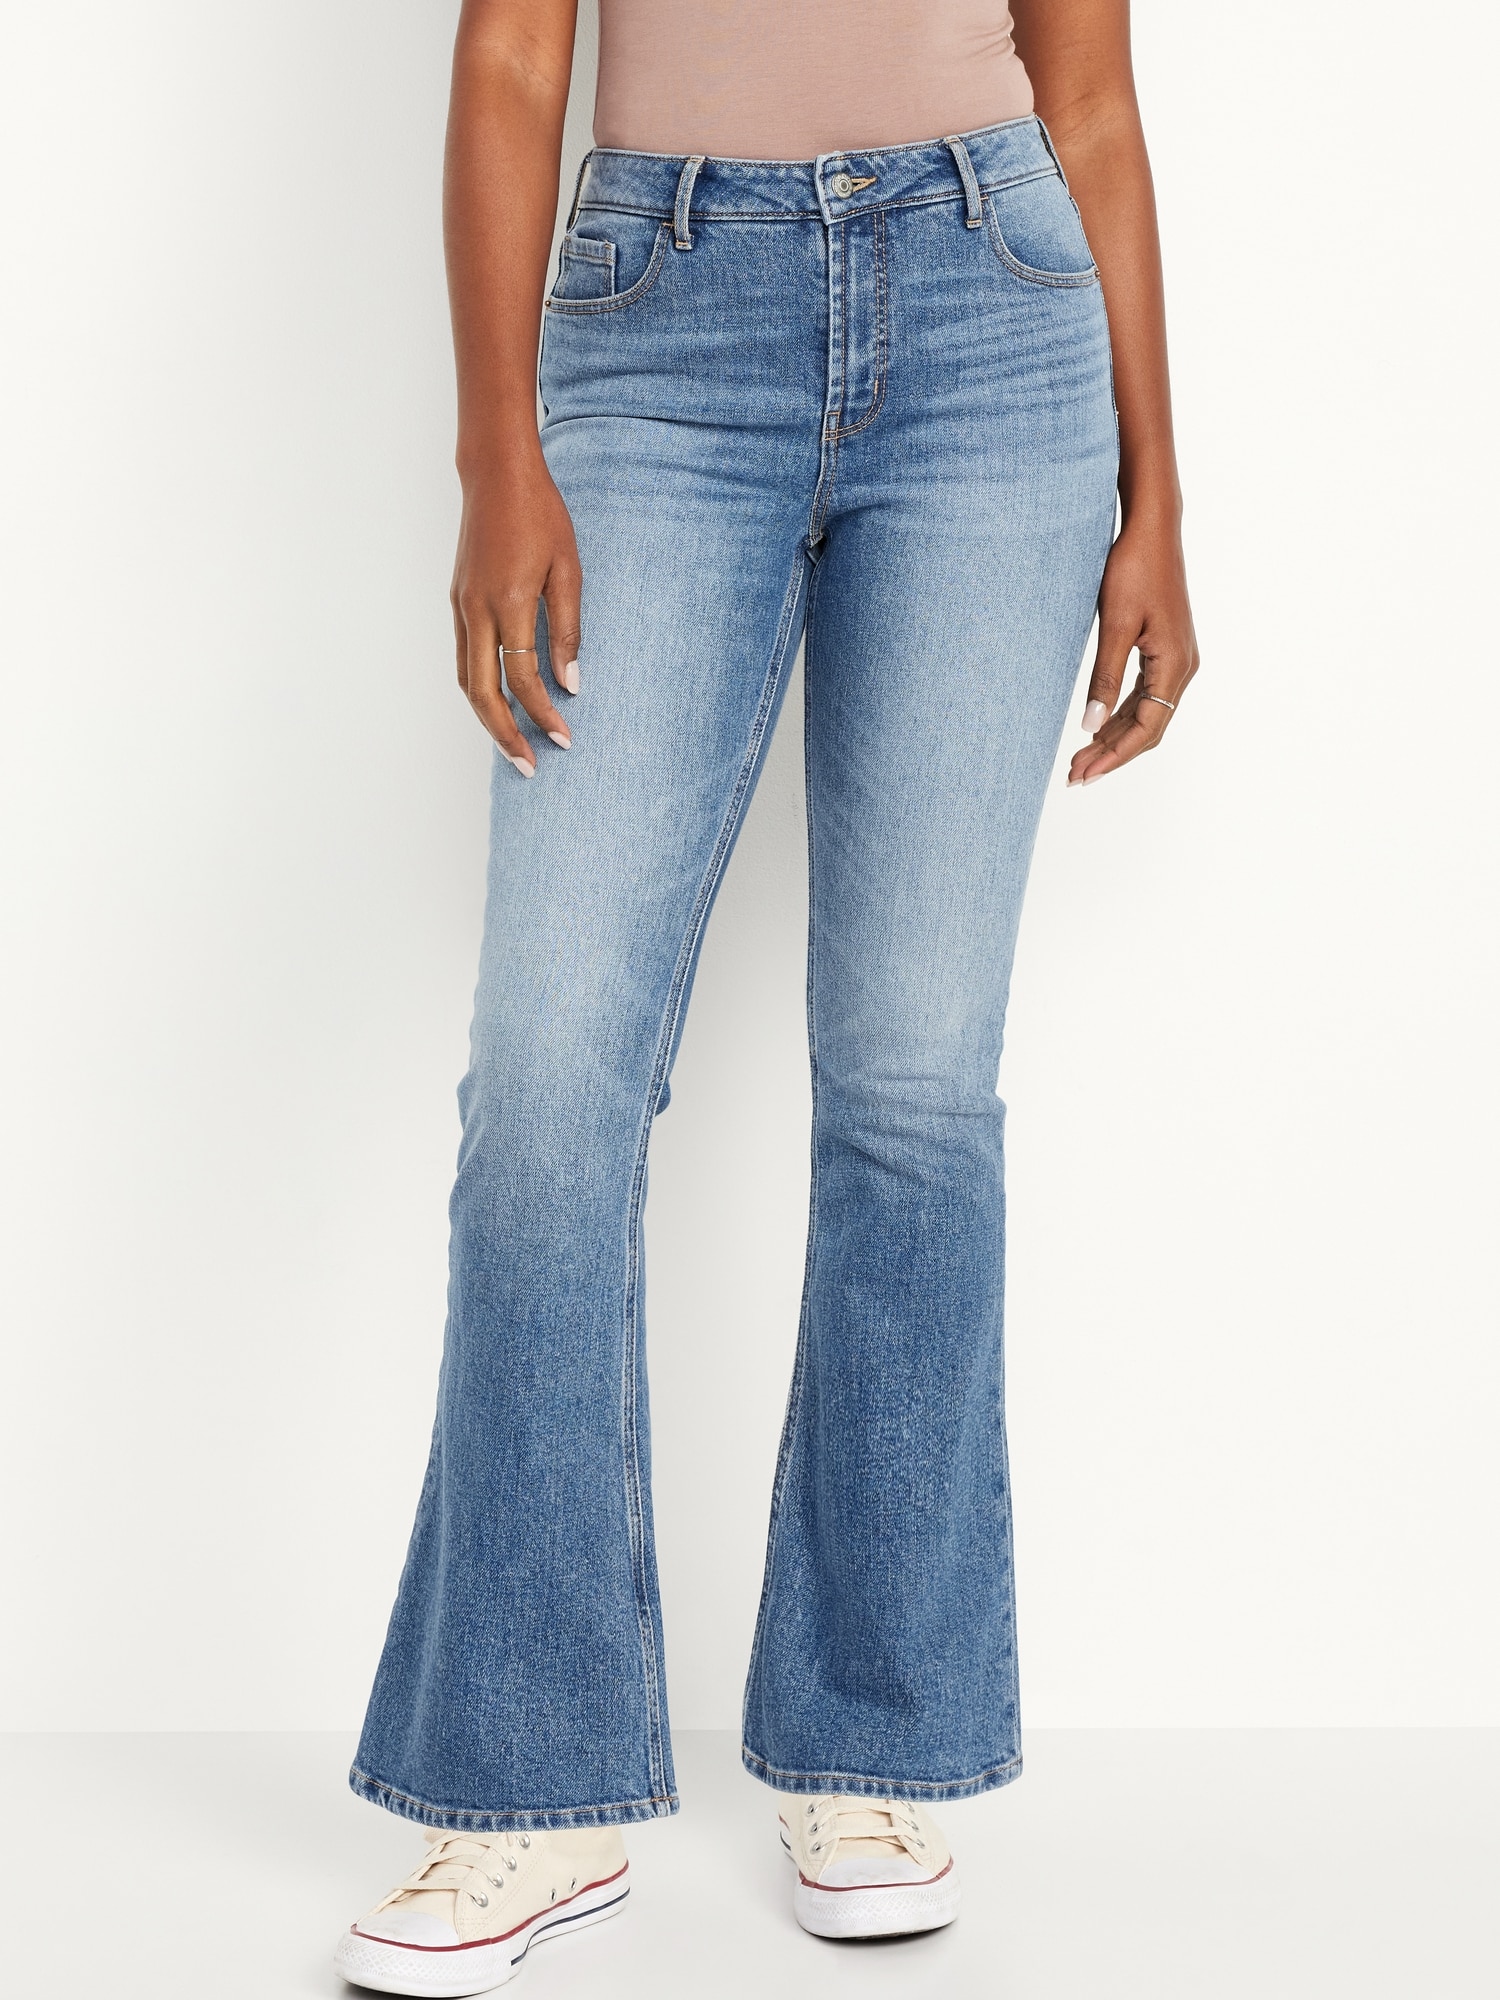 Old Navy High Rise Flare Jeans Blue Size 14 - $27 (40% Off Retail) - From  Sara